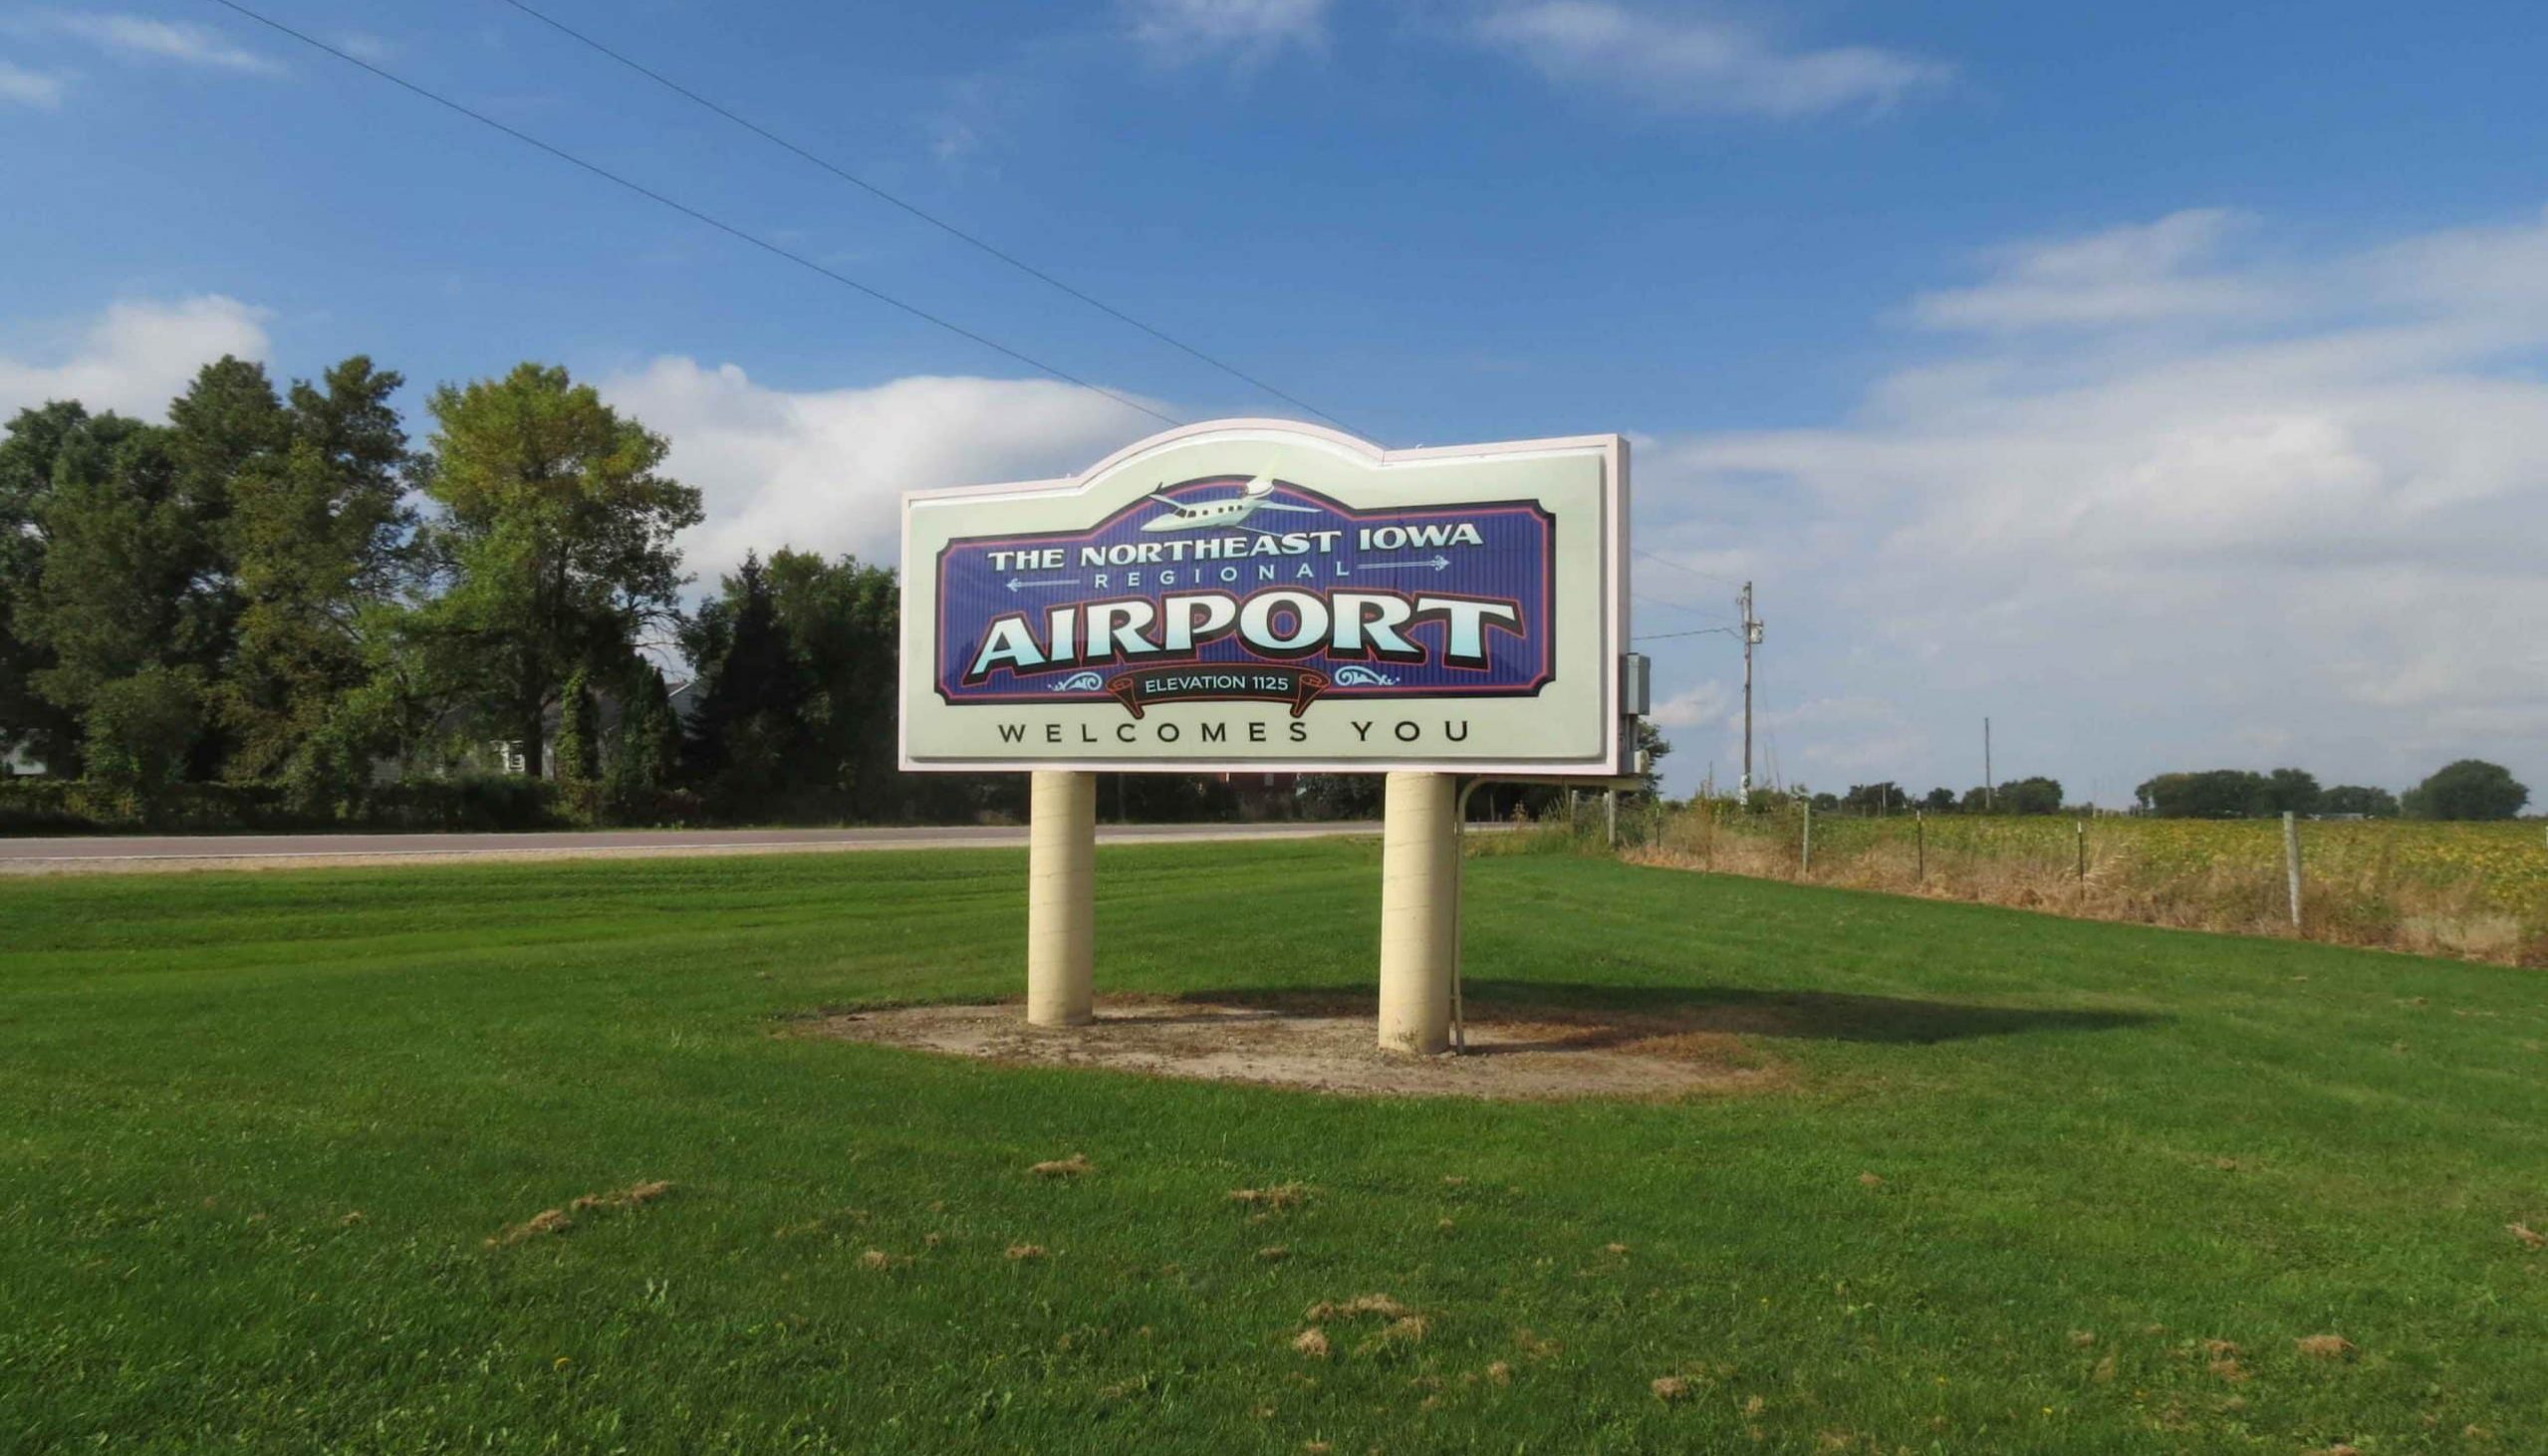 Aviation authority adds runway project to regional airport’s capital plan